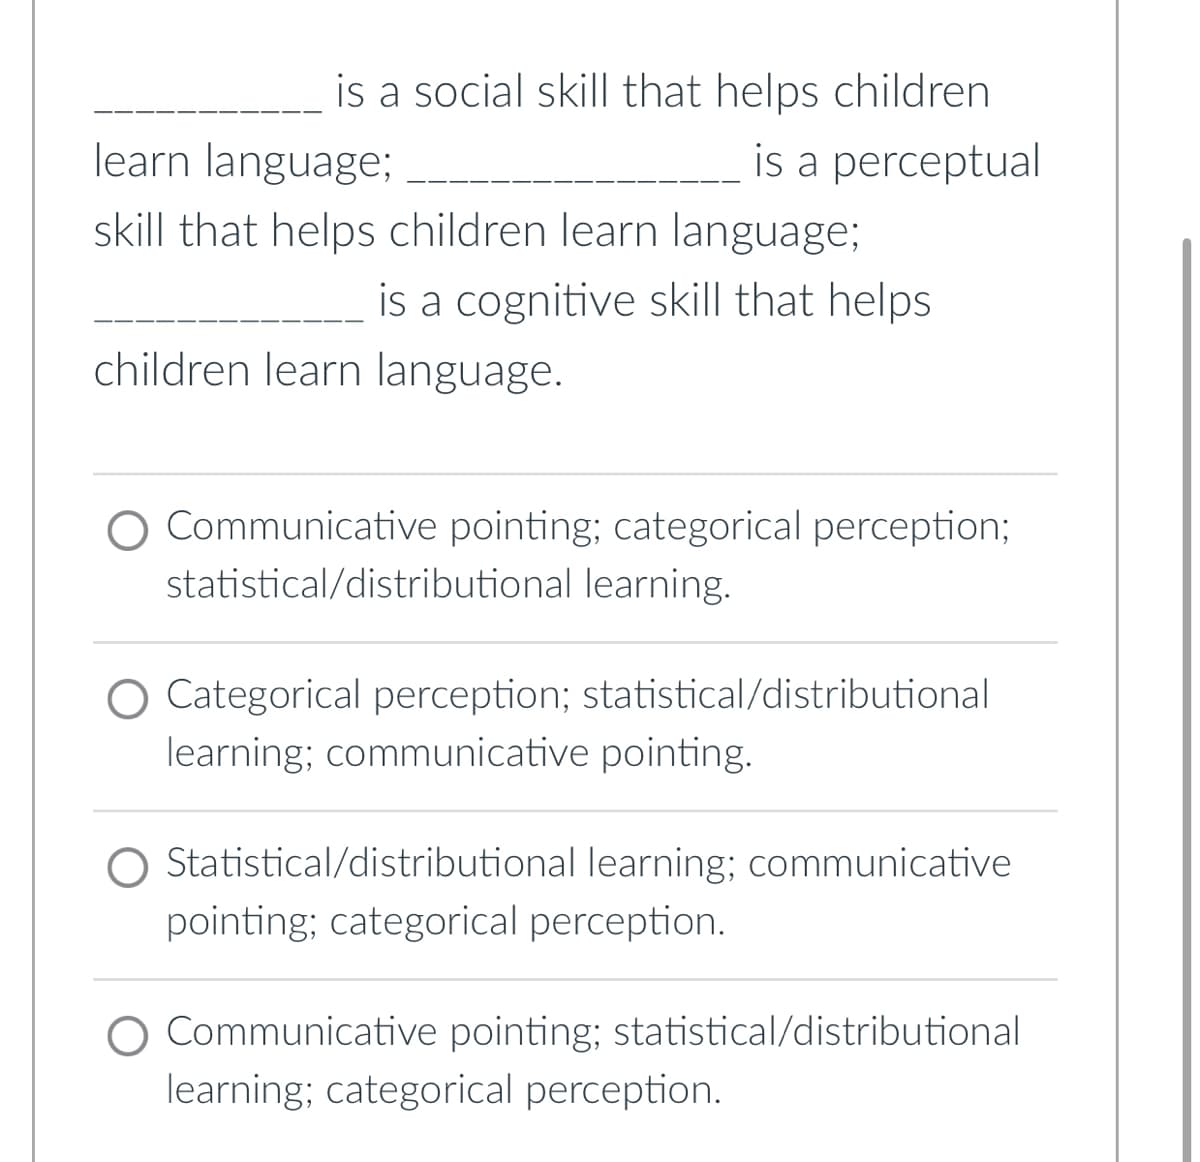 is a social skill that helps children
learn language;
is a perceptual
skill that helps children learn language;
is a cognitive skill that helps
children learn language.
O Communicative pointing; categorical perception;
statistical/distributional learning.
Categorical perception; statistical/distributional
learning; communicative pointing.
Statistical/distributional learning; communicative
pointing; categorical perception.
Communicative pointing; statistical/distributional
learning; categorical perception.